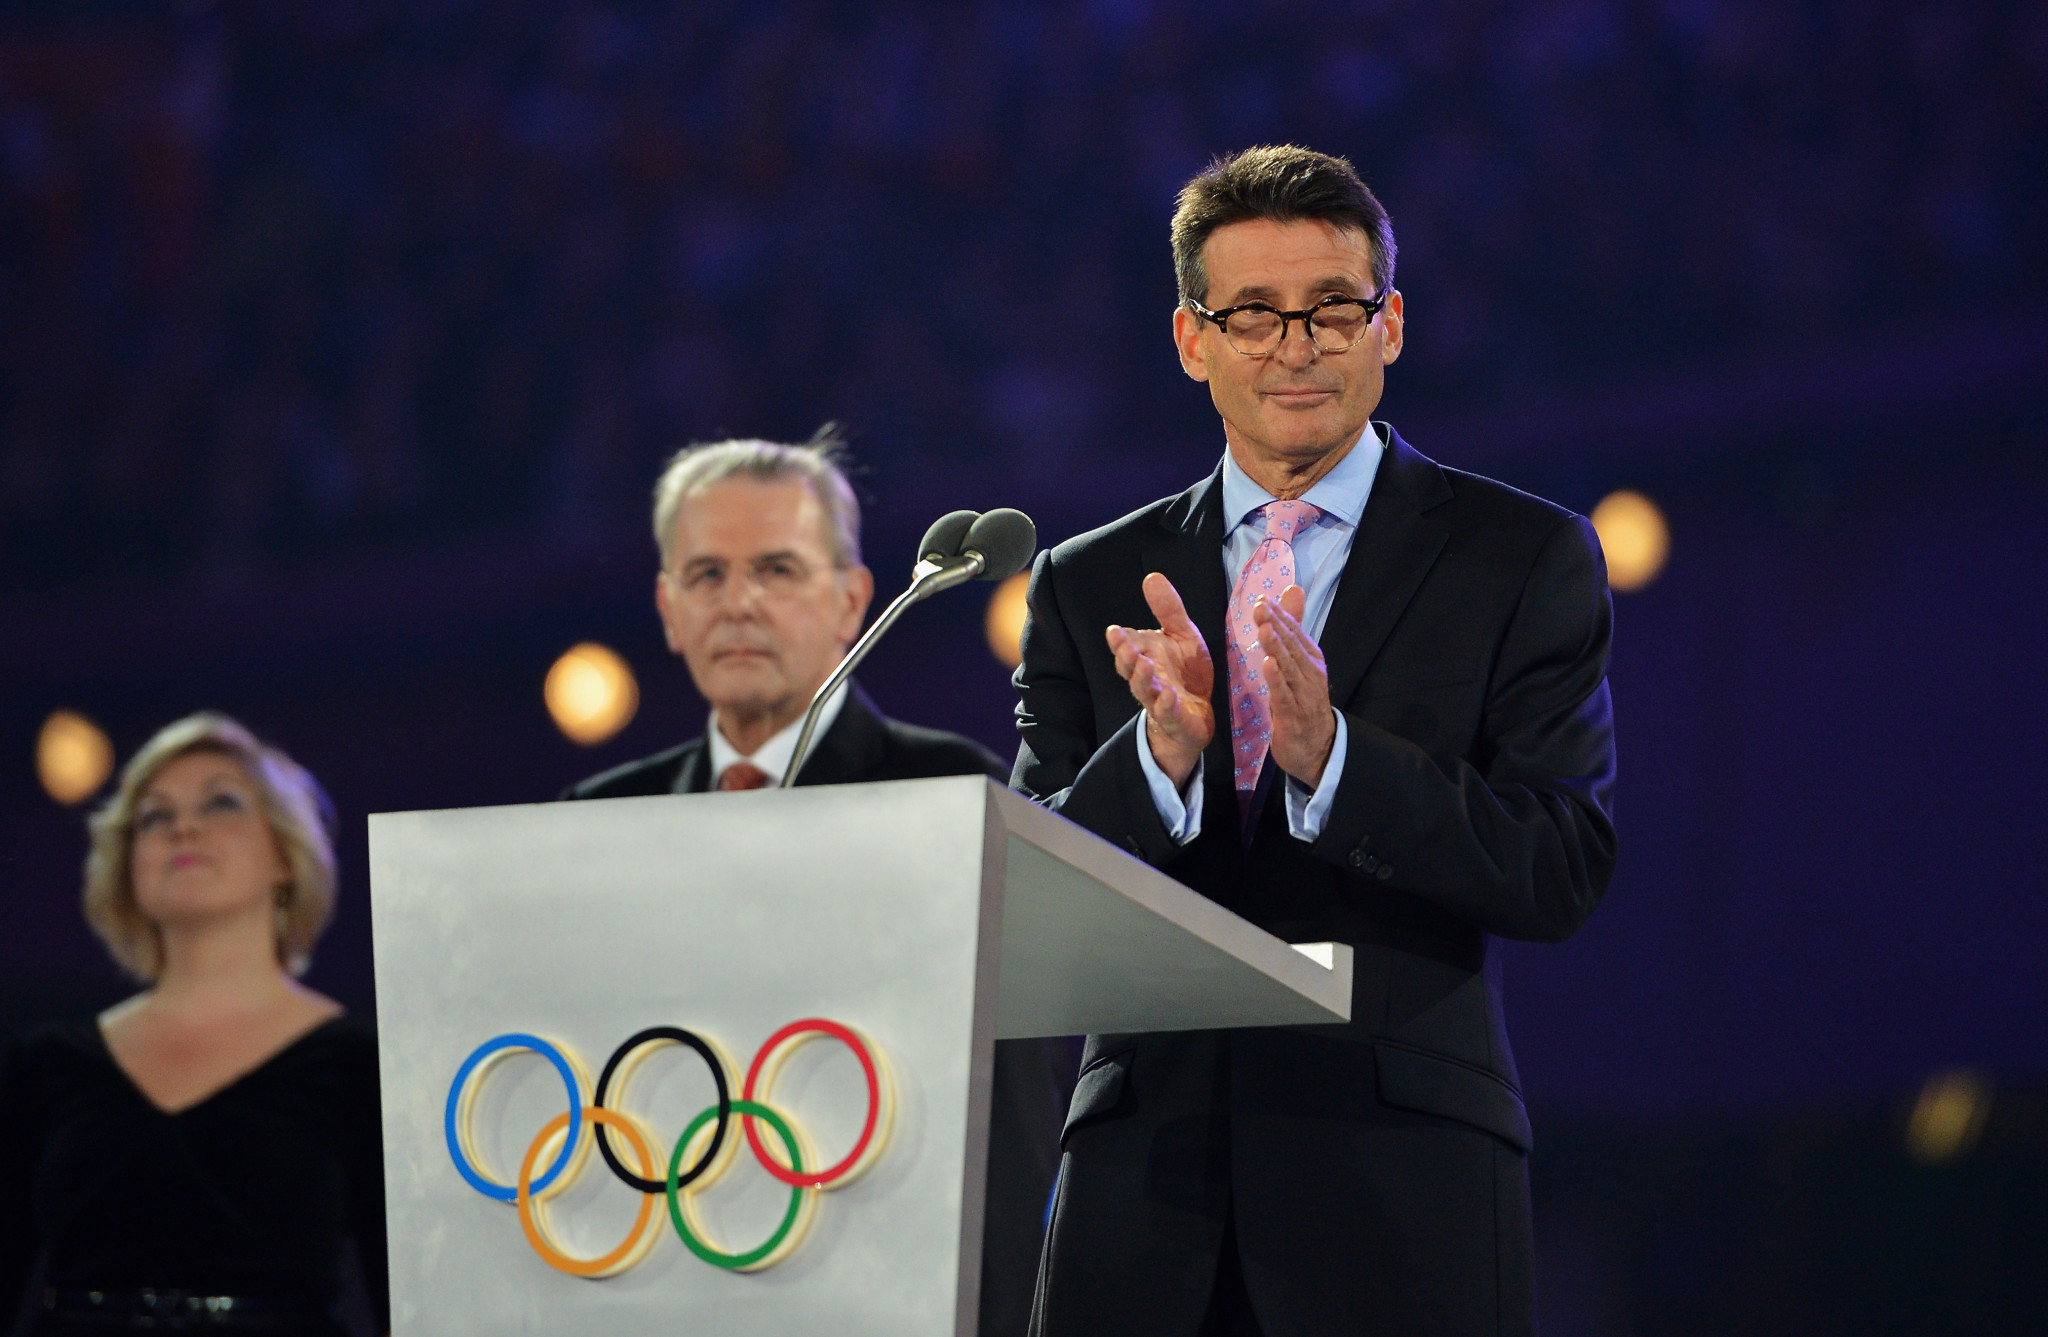 Sebastian Coe was chair of the London 2012 Olympics Organising Committee ©Getty Images